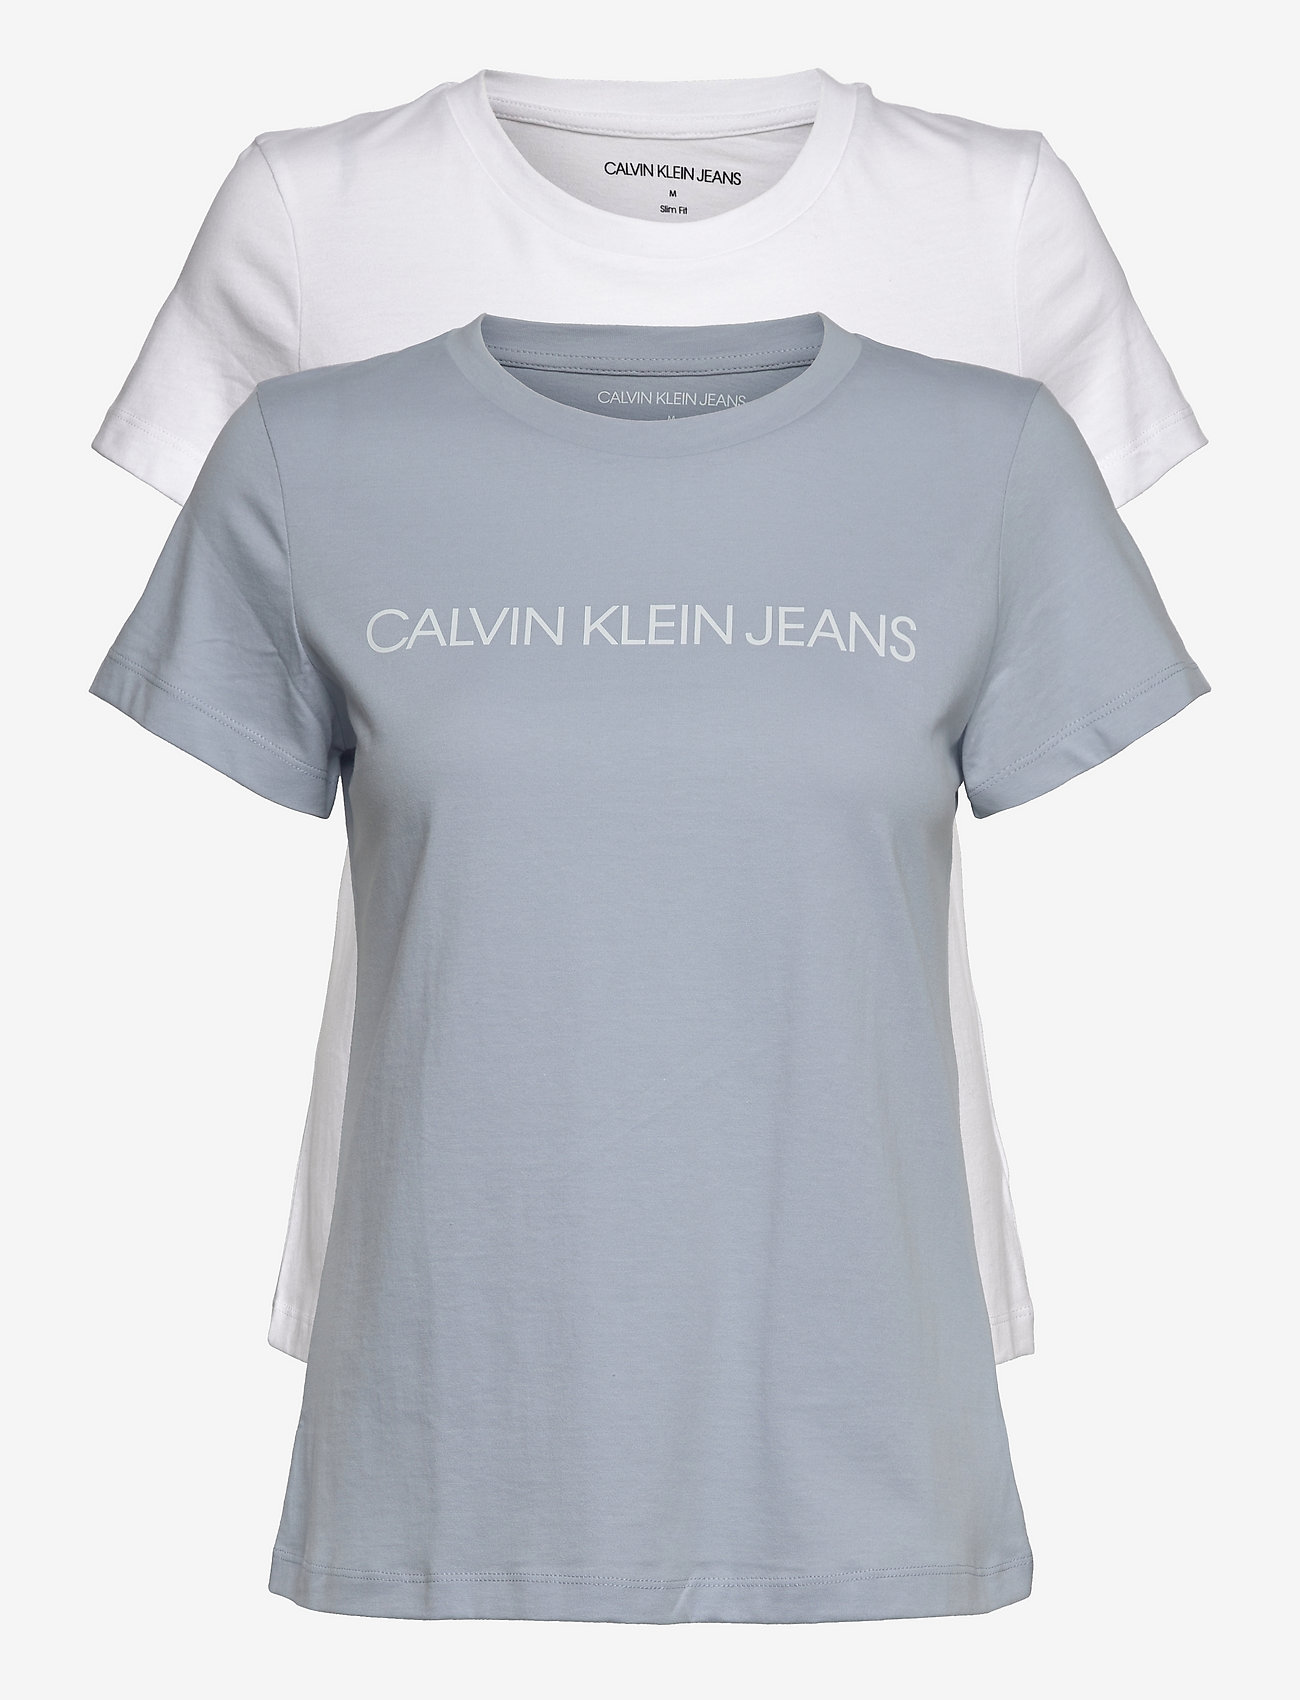 Calvin Klein Jeans - INSTITUTIONAL LOGO 2-PACK TEE - t-shirts - bayshore blue/bright white - 0